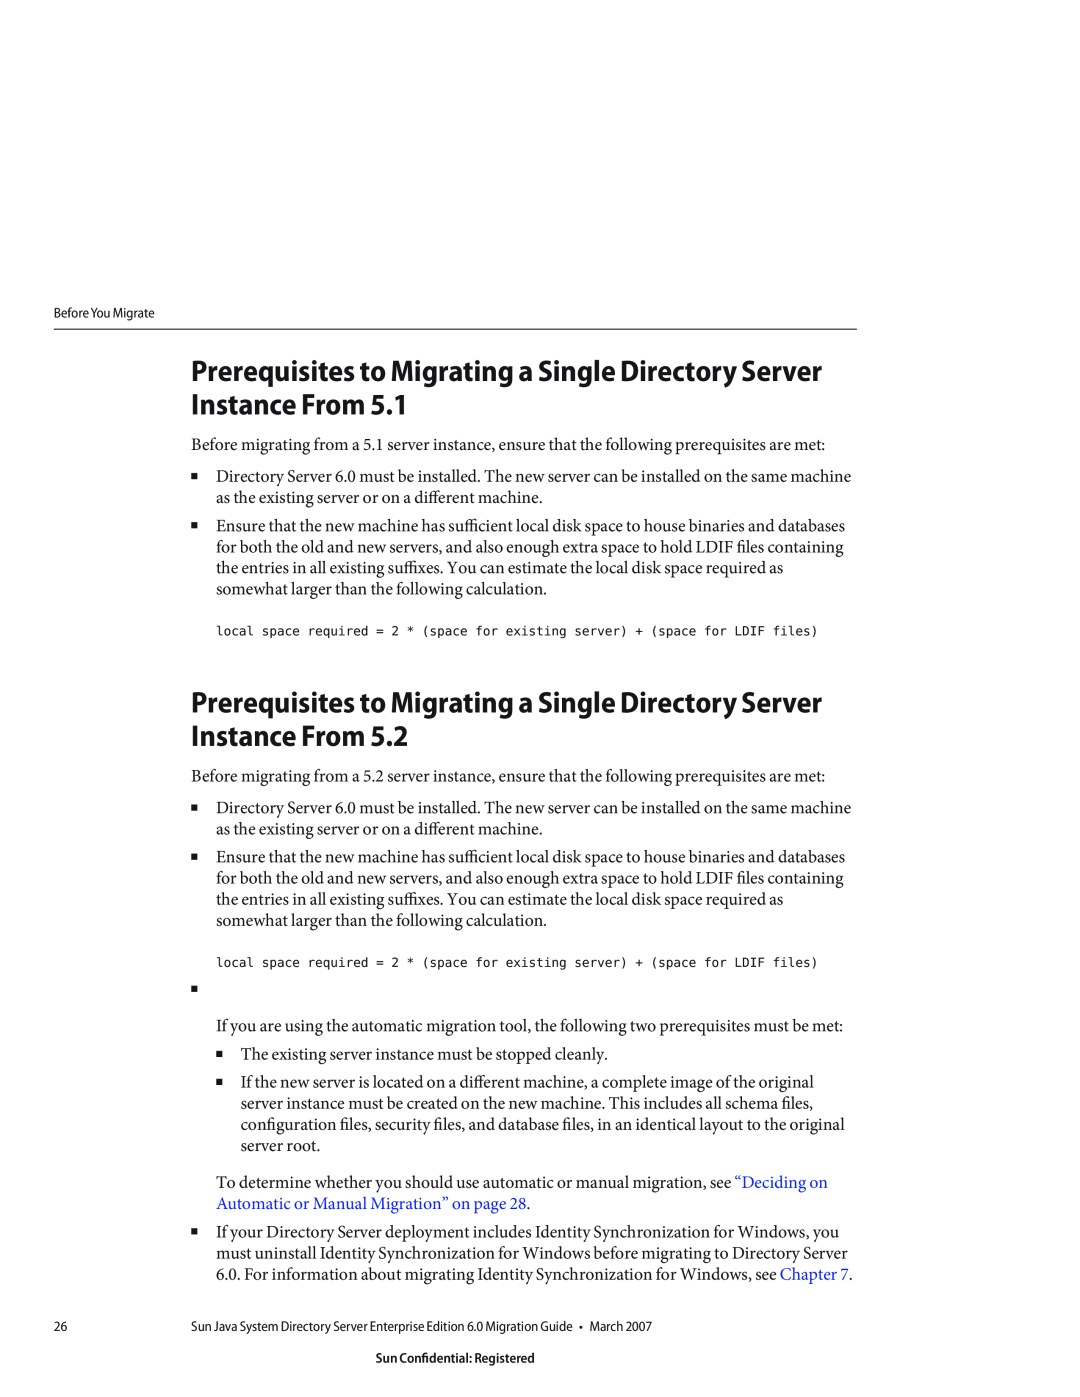 Sun Microsystems 8190994 manual Prerequisites to Migrating a Single Directory Server Instance From, Before You Migrate 